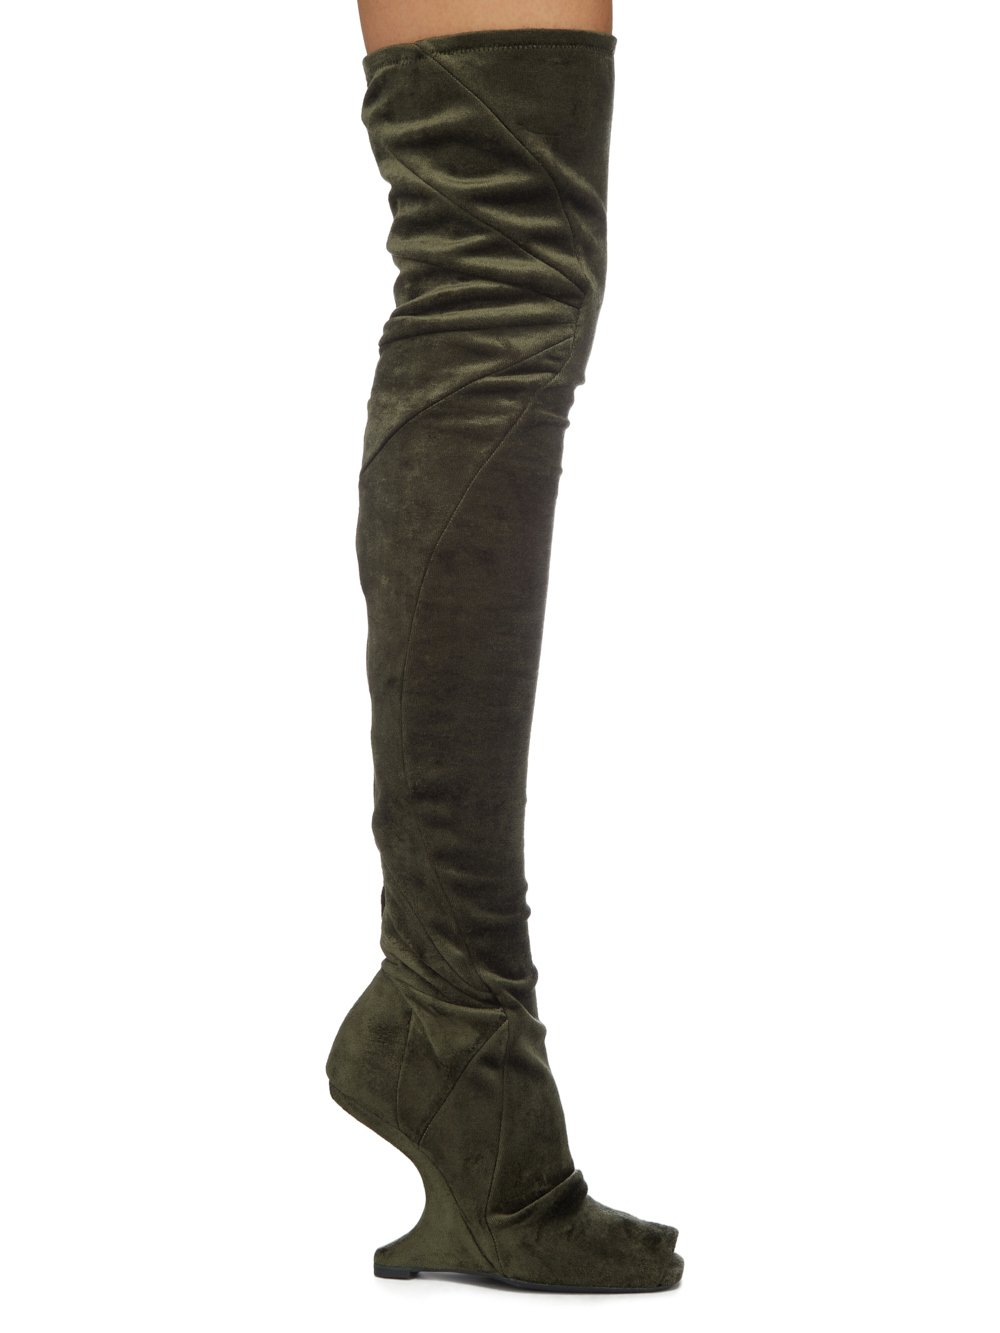 RICK OWENS FW23 LUXOR CANTILEVER 11 THIGH HIGH BOOT IN FOREST VELVET JERSEY